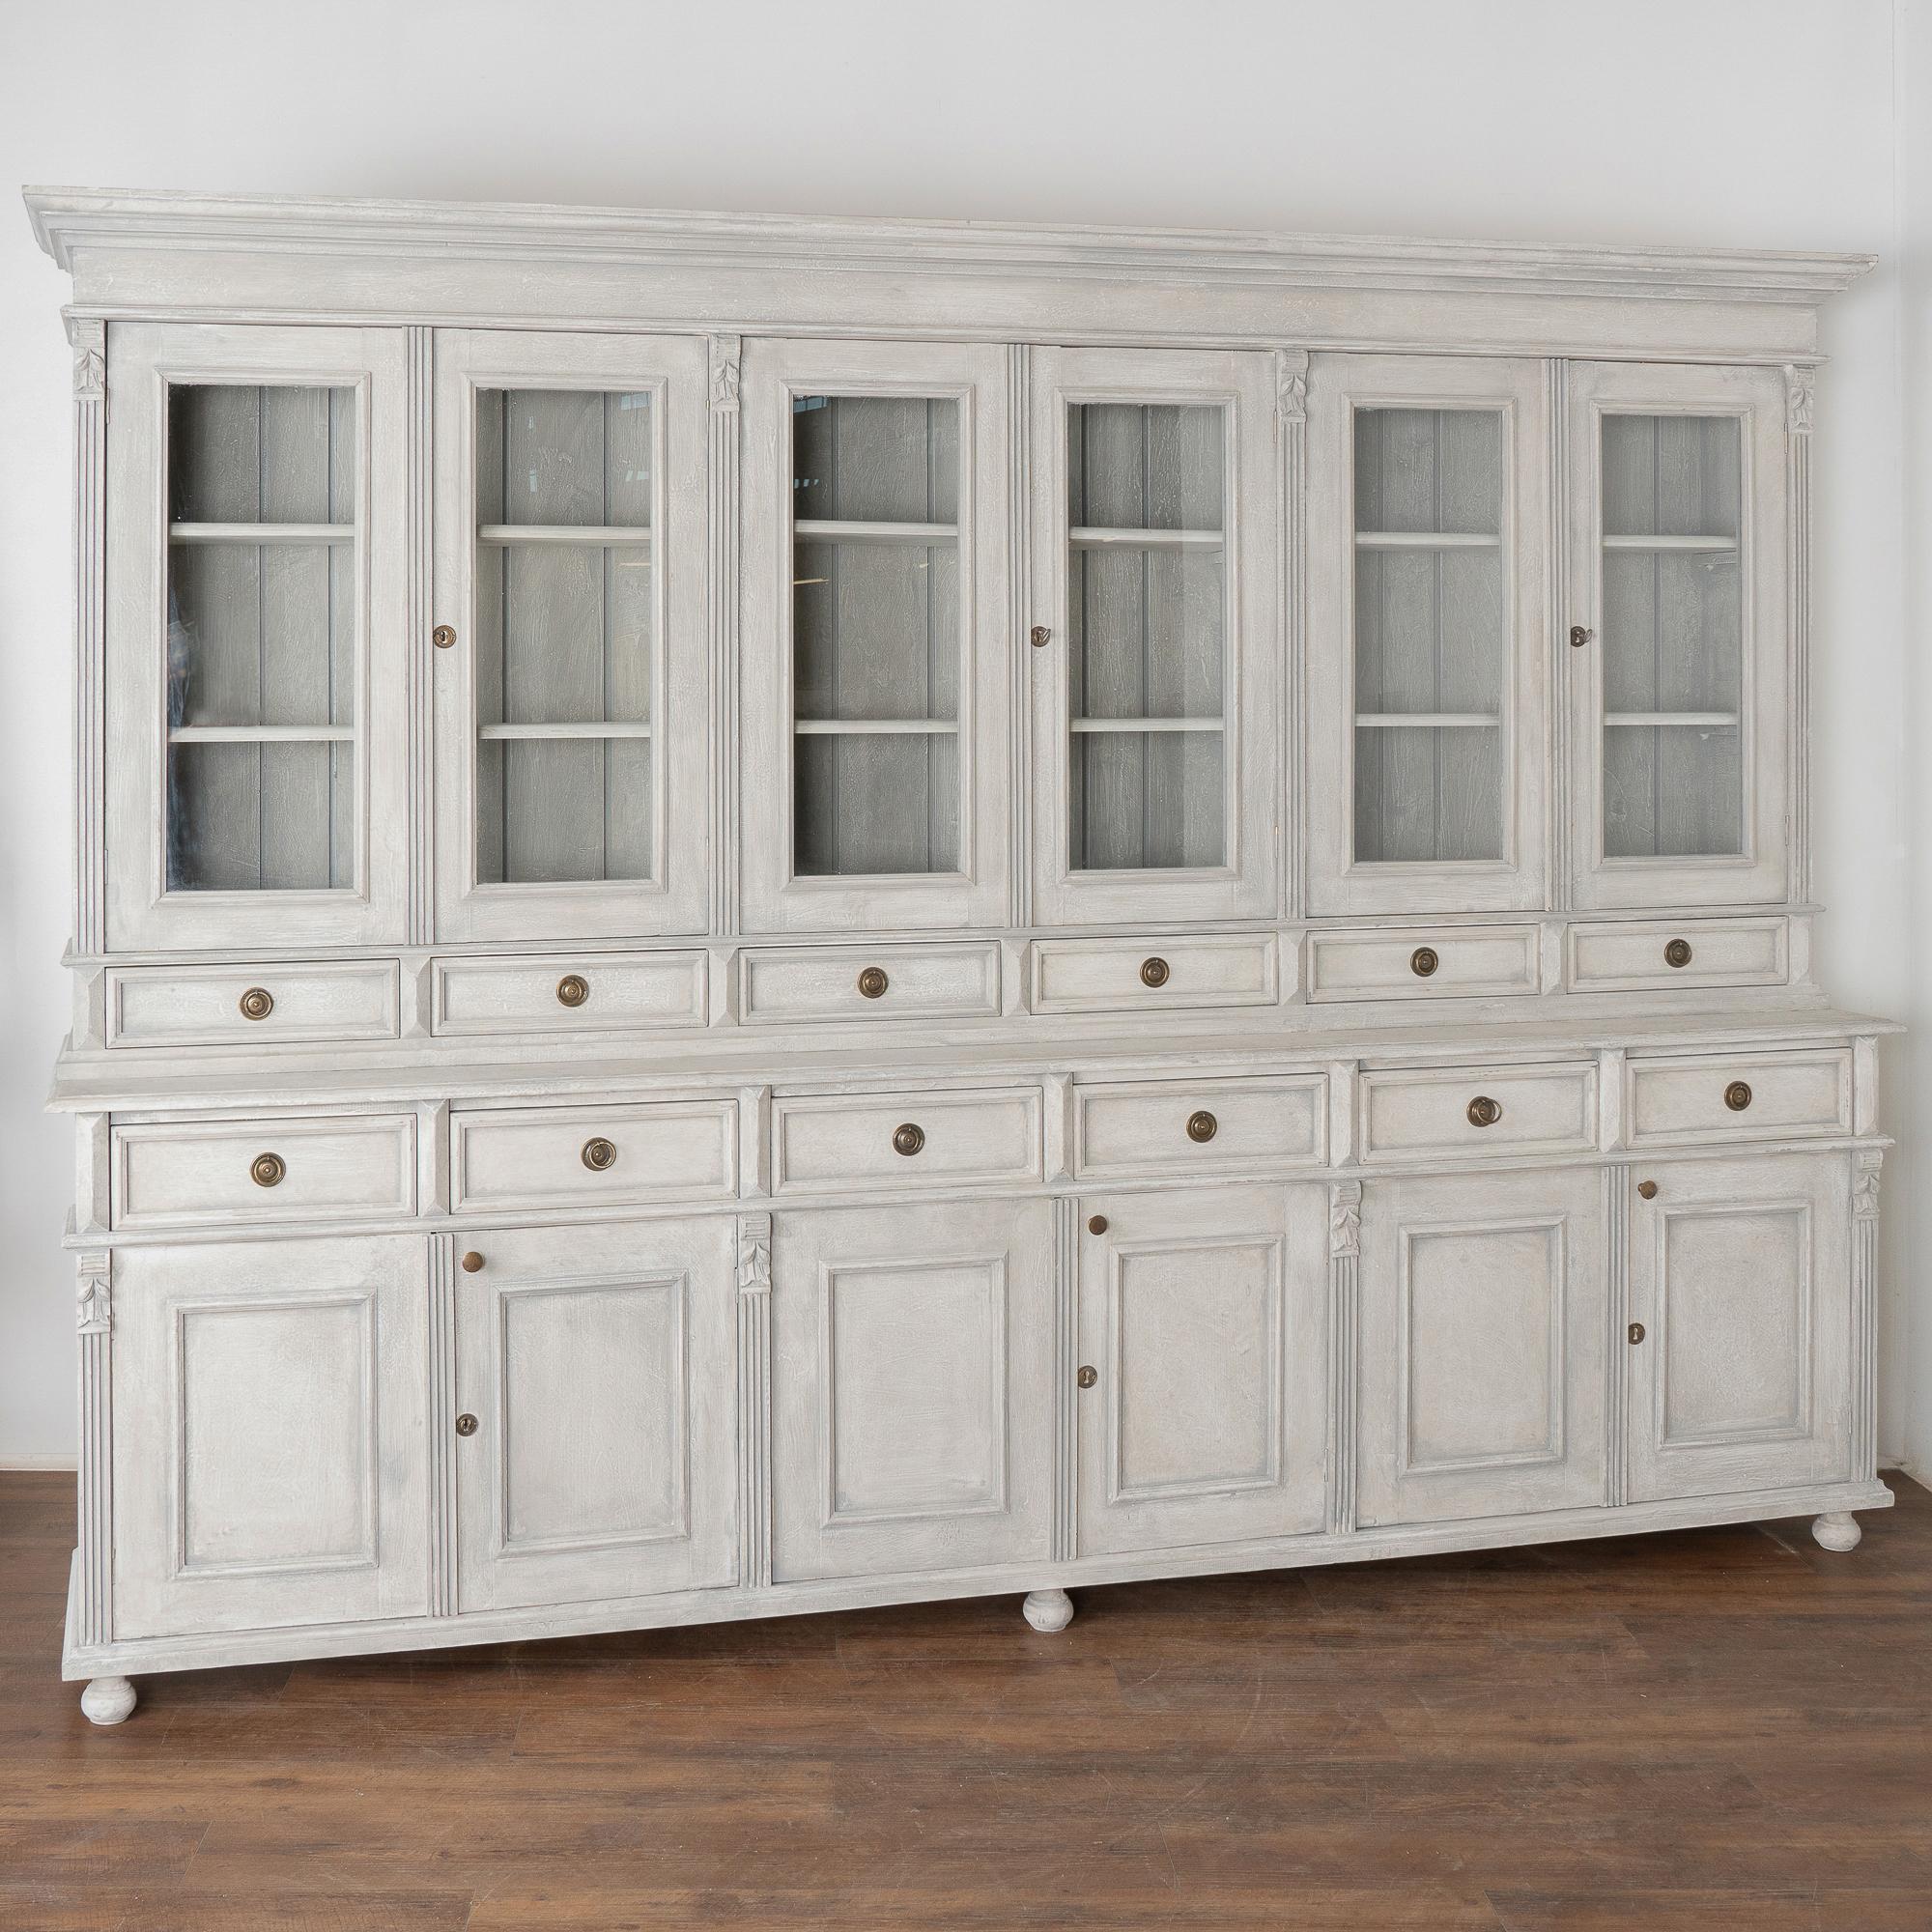 This striking large pine bookcase or display wall unit is a reproduction made in Europe and breaks down into two large upper and lower sections.
The lovely gray painted professional finish has white undertones, please examine close up photos to